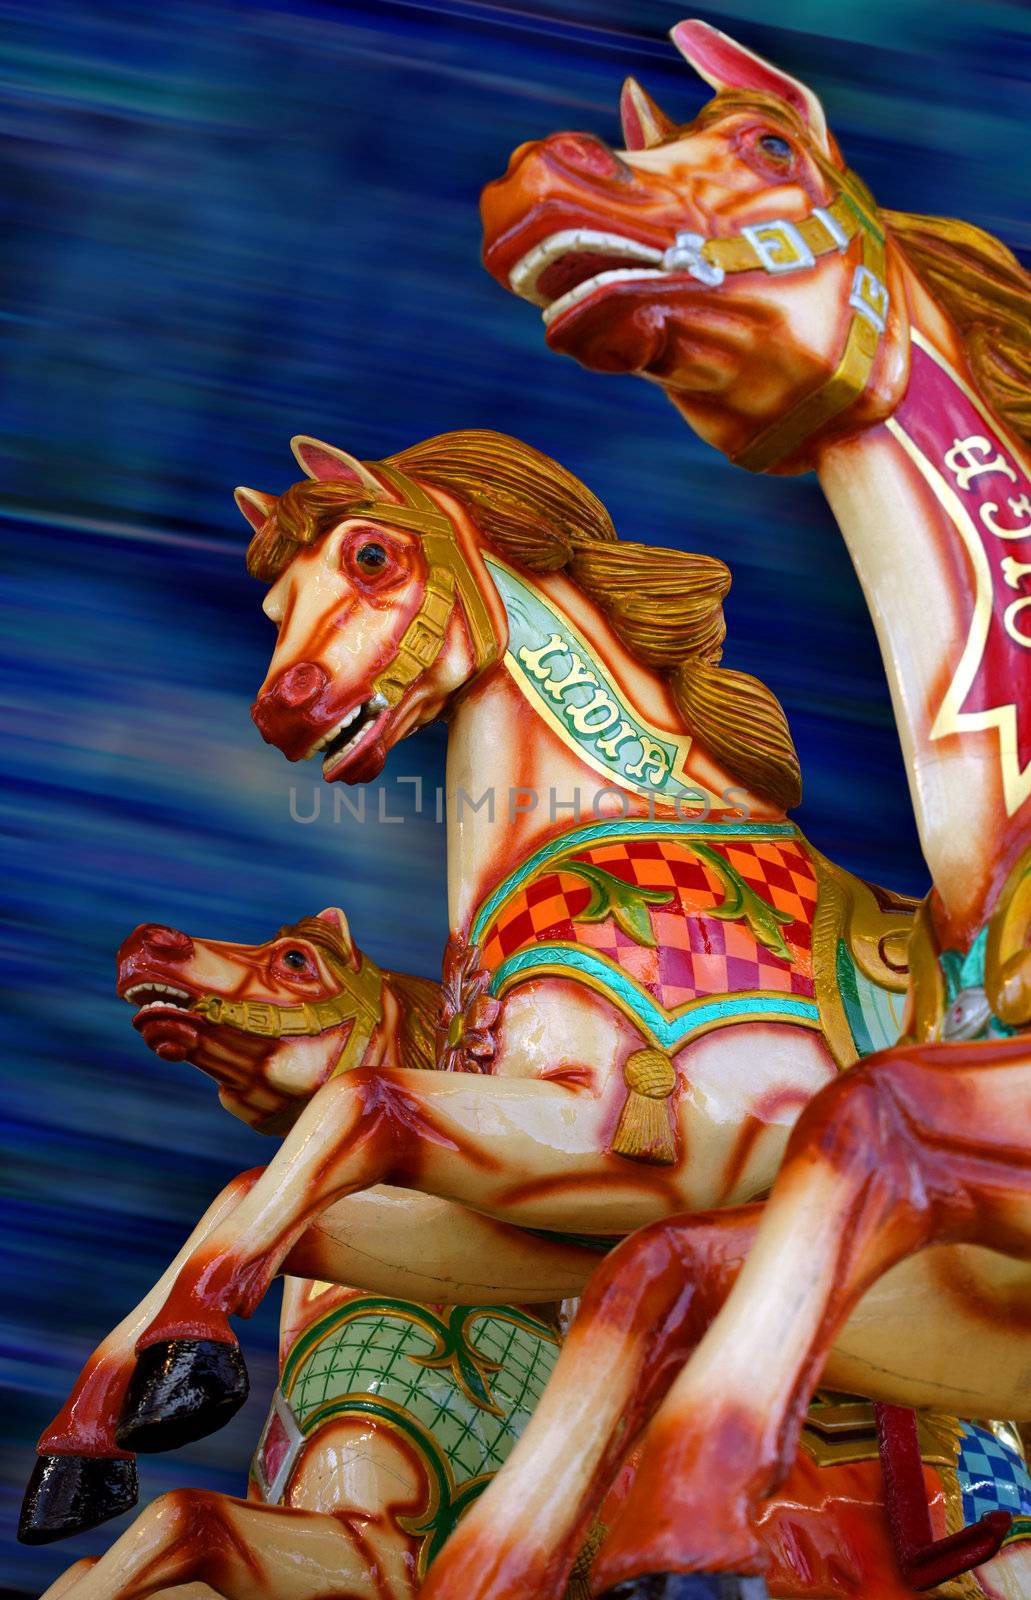 Three horses of a Carousel by sumners